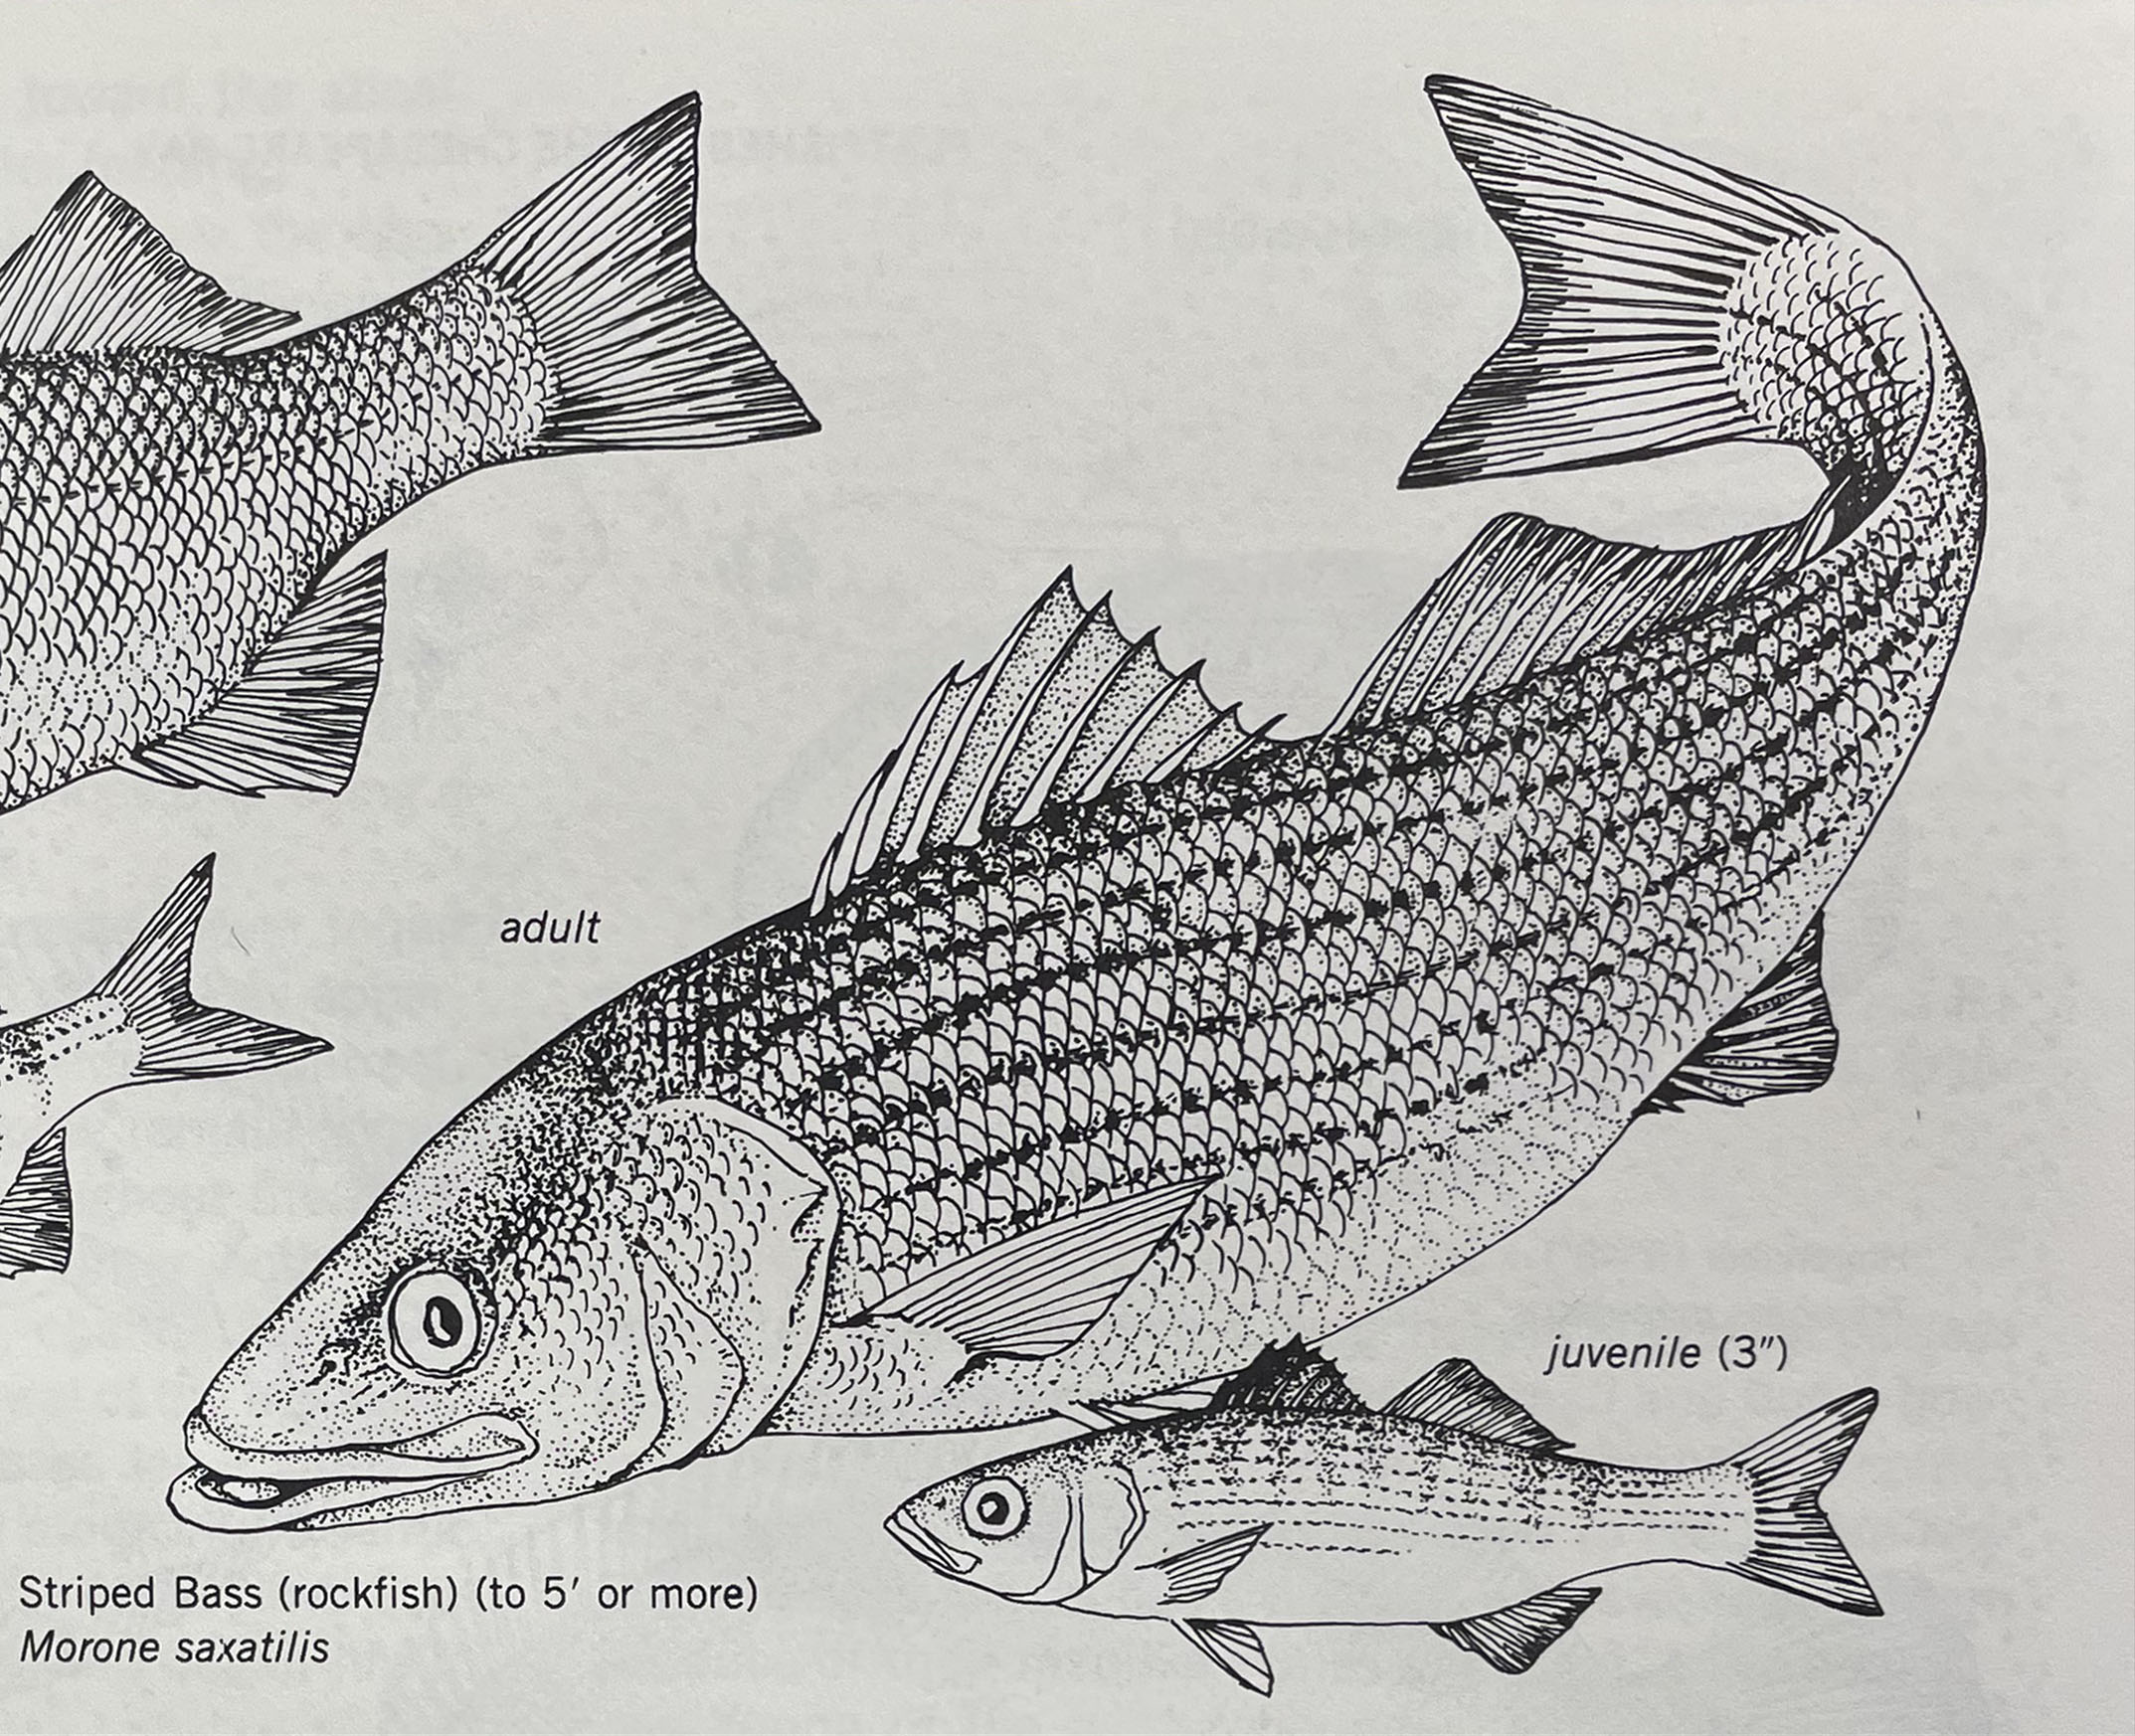 Striped Bass, or Rockfish, Maryland's state fish